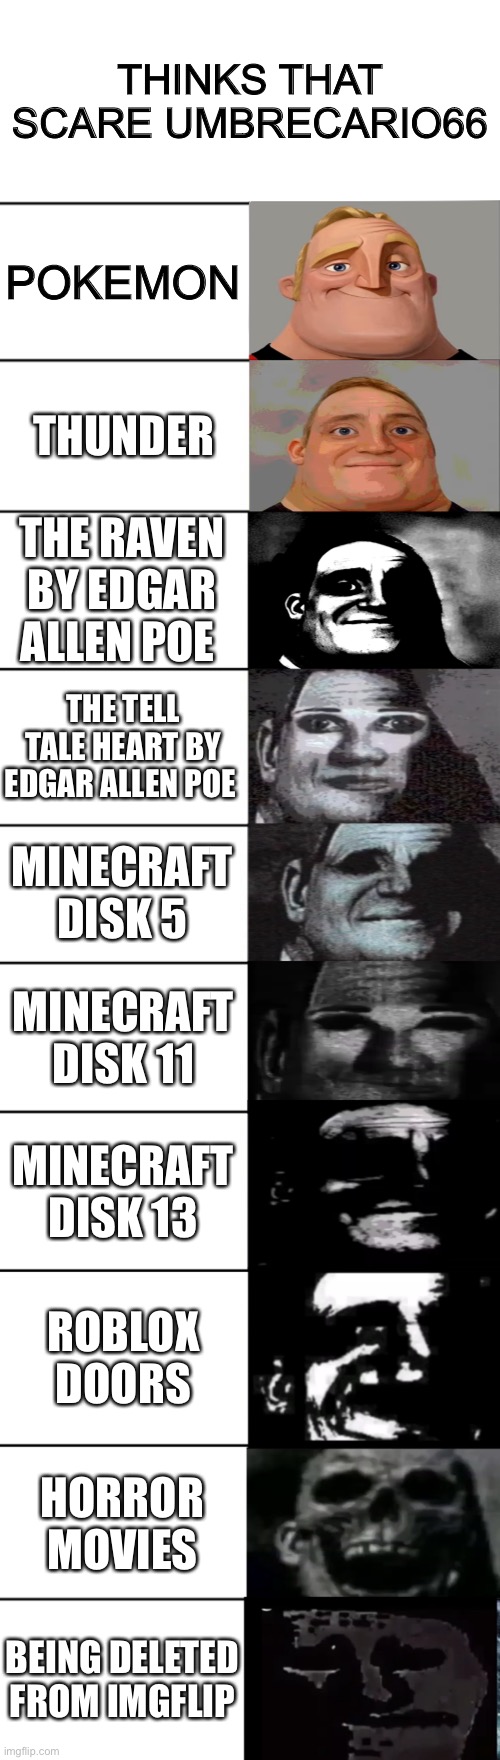 A All about umbrecaro66 | THINKS THAT SCARE UMBRECARIO66; POKEMON; THUNDER; THE RAVEN BY EDGAR ALLEN POE; THE TELL TALE HEART BY EDGAR ALLEN POE; MINECRAFT DISK 5; MINECRAFT DISK 11; MINECRAFT DISK 13; ROBLOX DOORS; HORROR MOVIES; BEING DELETED FROM IMGFLIP | image tagged in mr incredible becoming uncanny | made w/ Imgflip meme maker